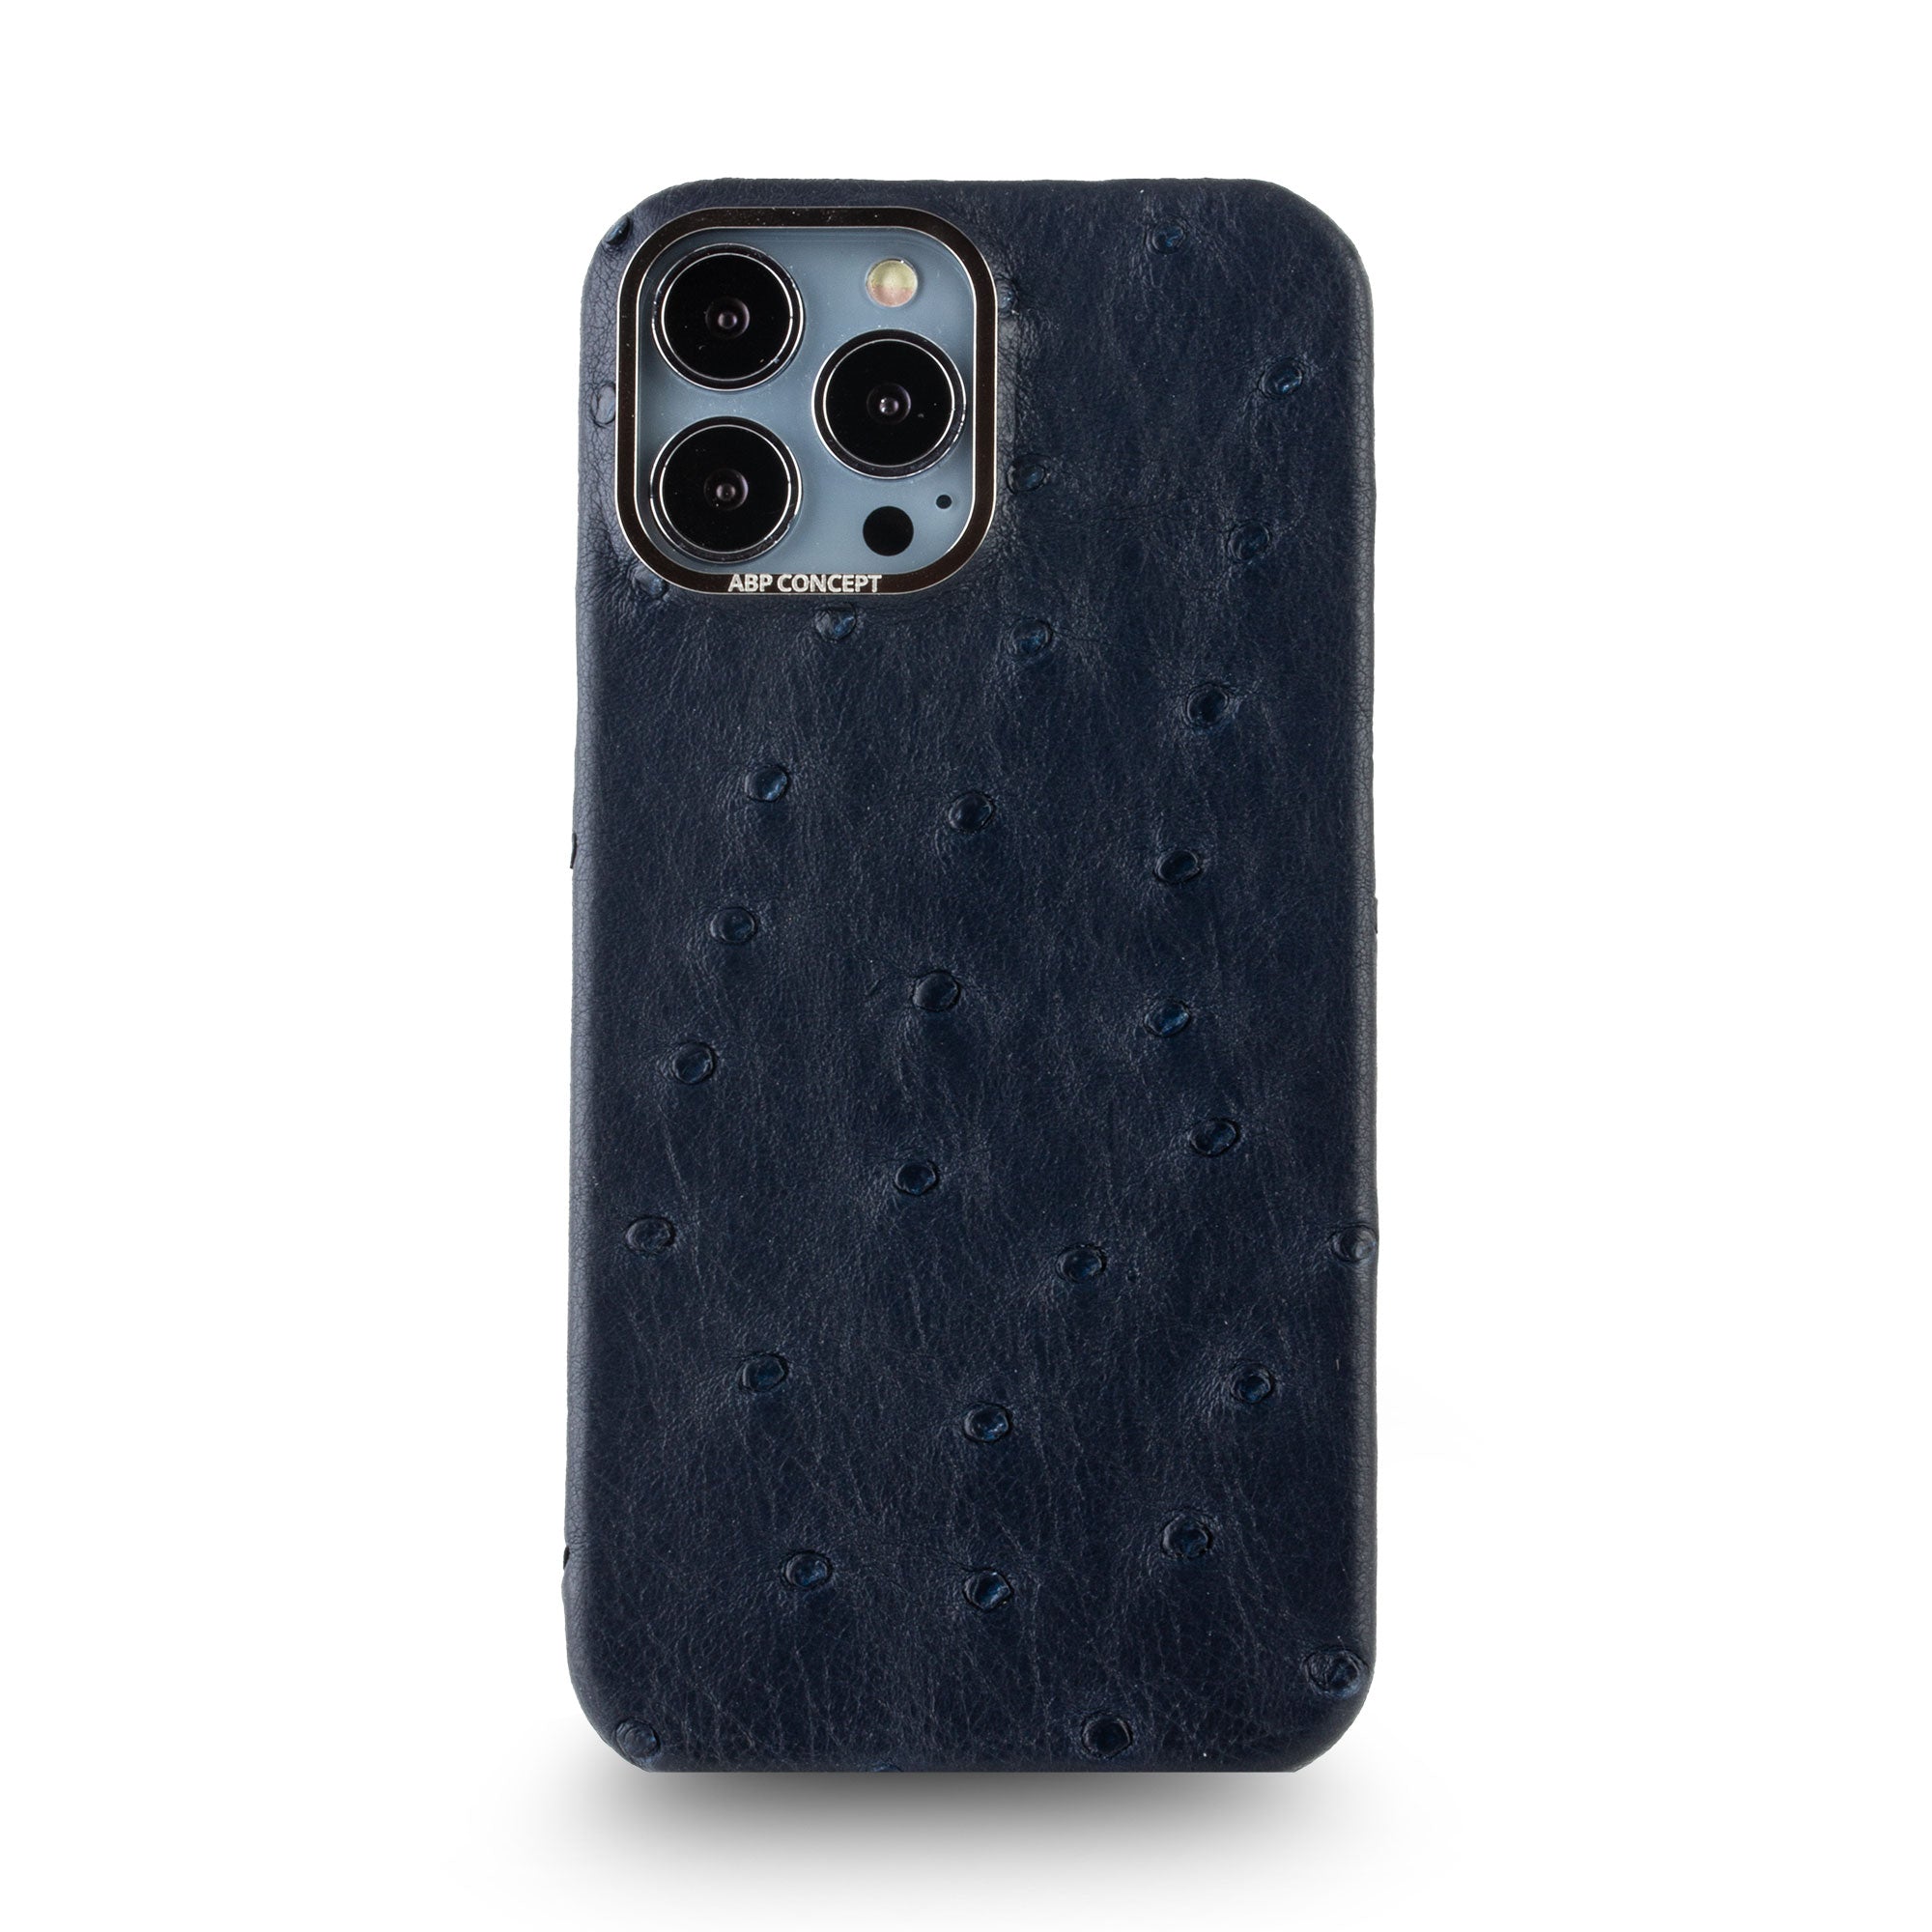 Clearance Sale - Leather iPhone case - iPhone 13 Pro Max - Navy blue ostrich